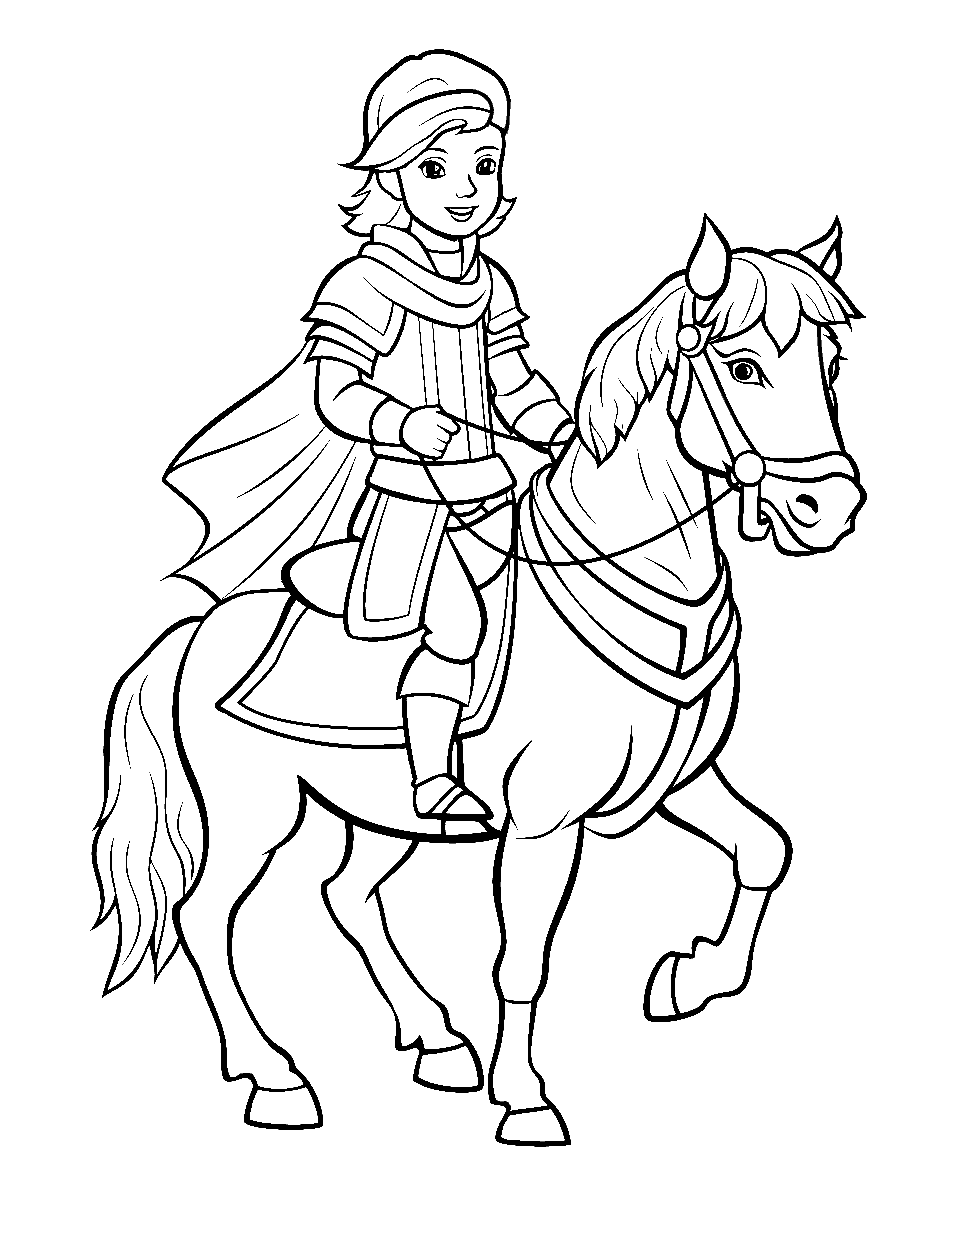 Elf Knight Riding a Horse Coloring Page - An elf knight riding a noble steed.